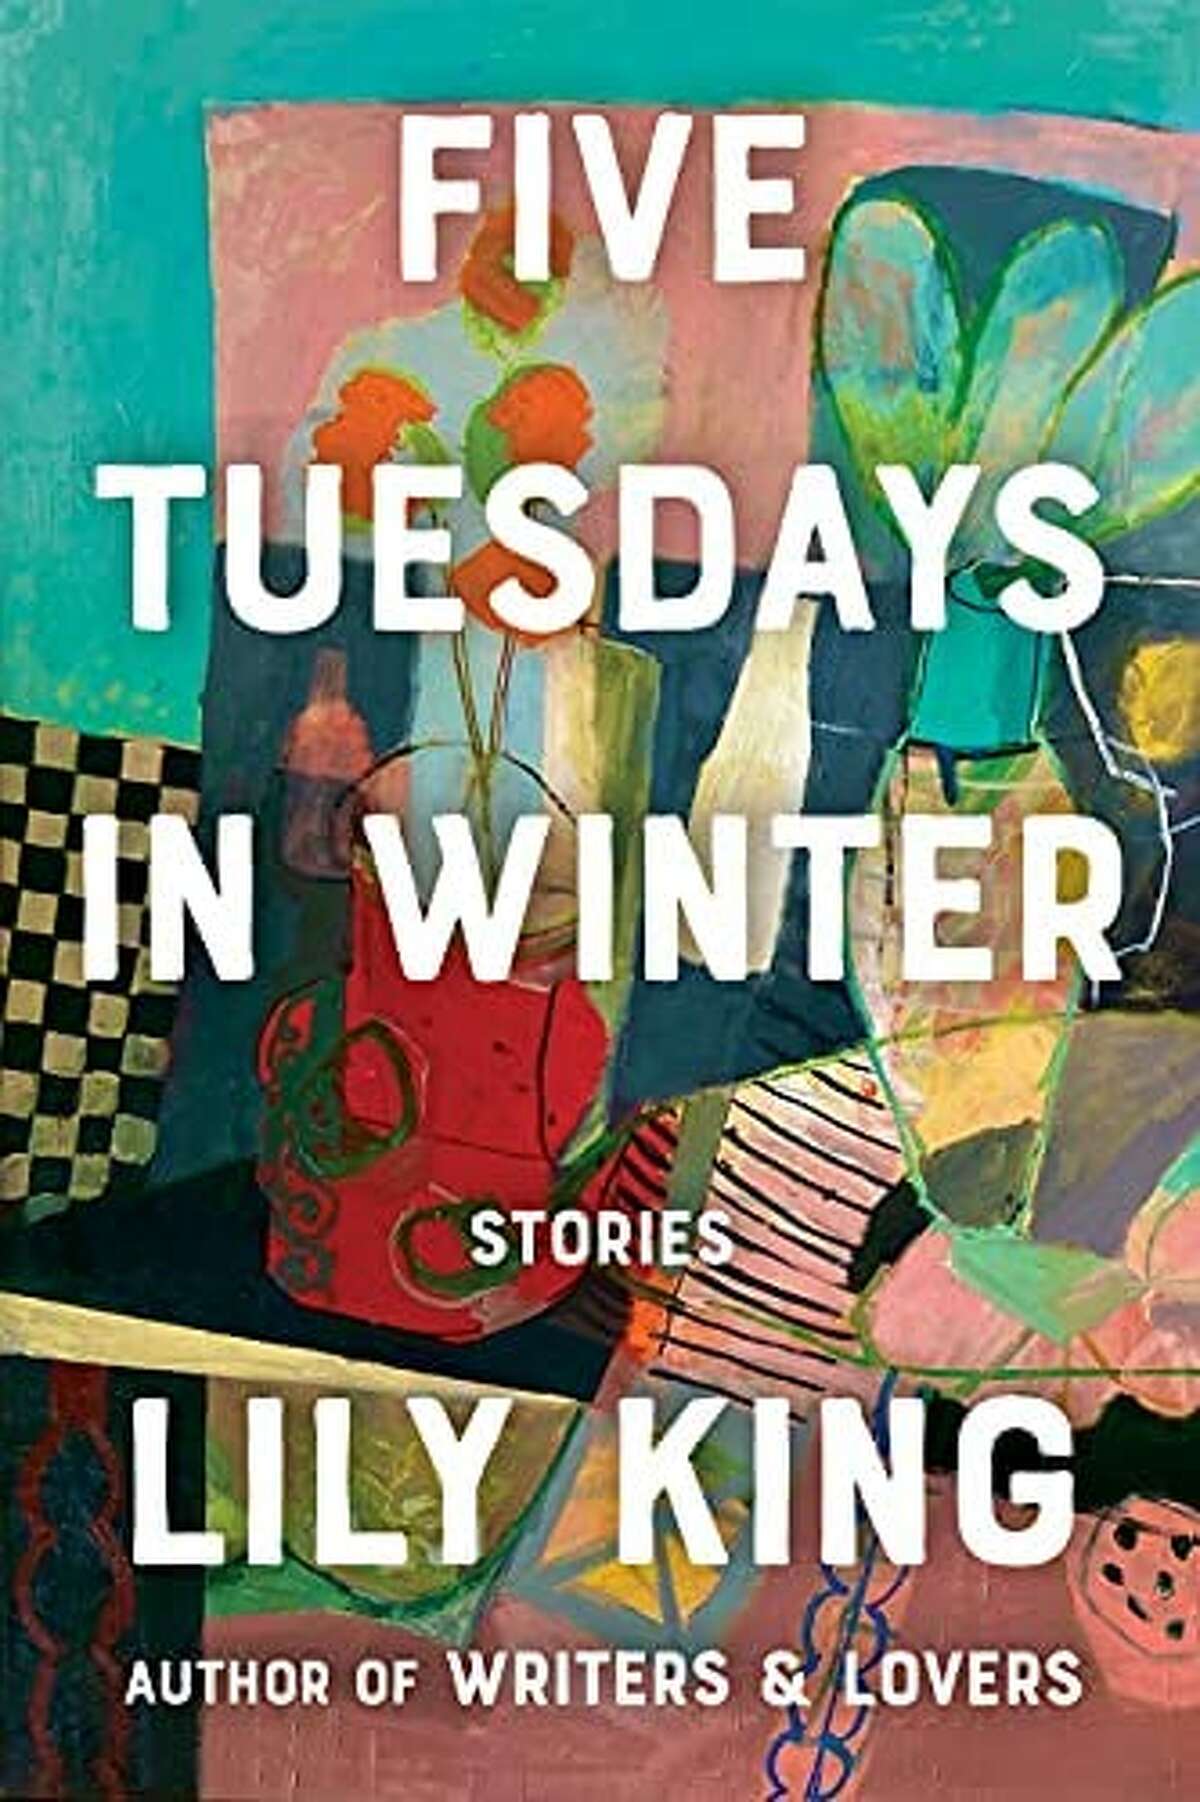 Gunn Memorial Library’s virtual Short Story Discussion group resumes its meetings this January with two selections from Lily King’s 2021 collection "Five Tuesdays in Winter."